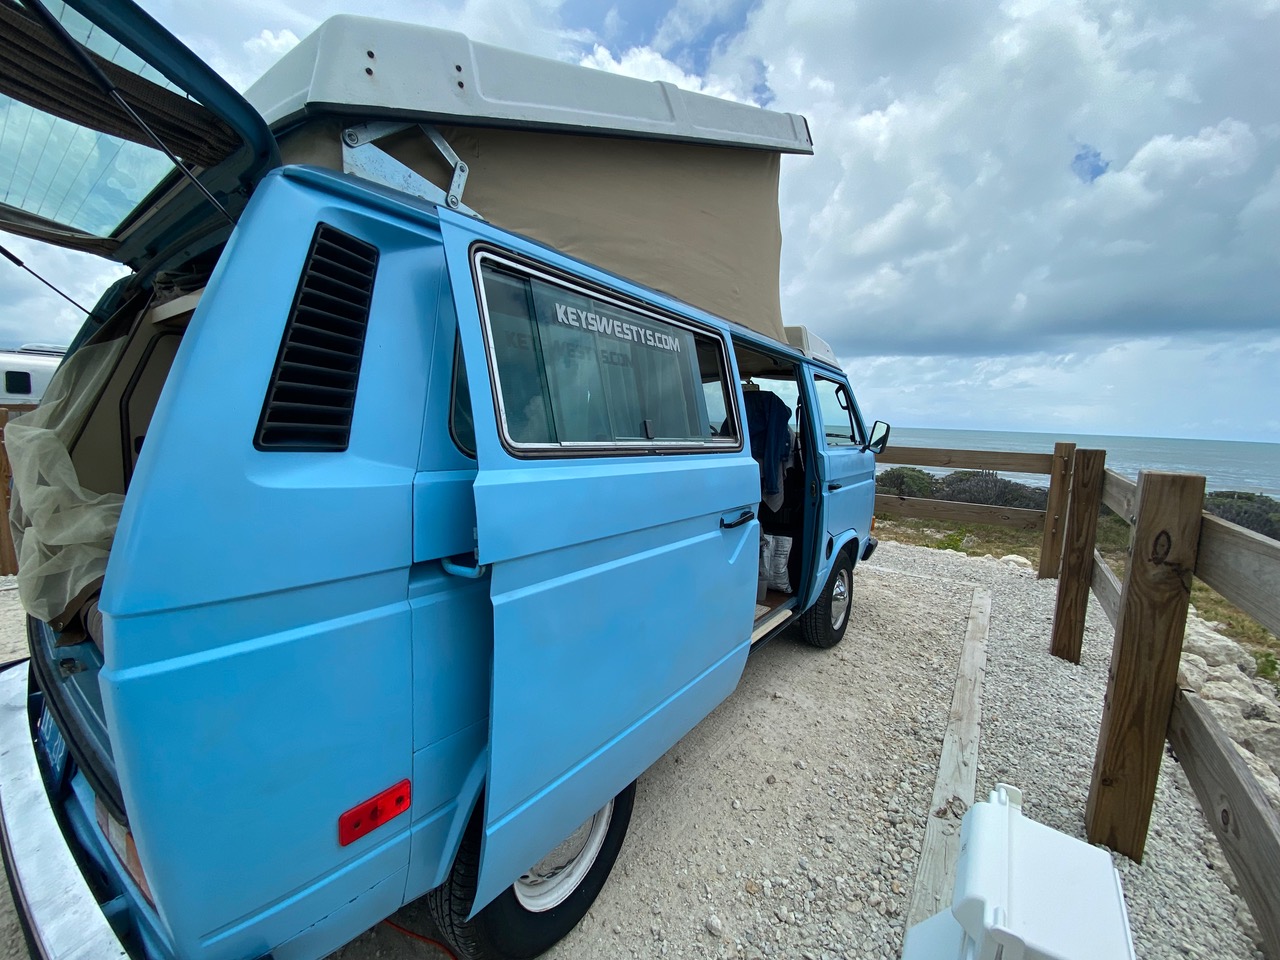 Limited edition VW camper van celebrates 30 years of the Hotel